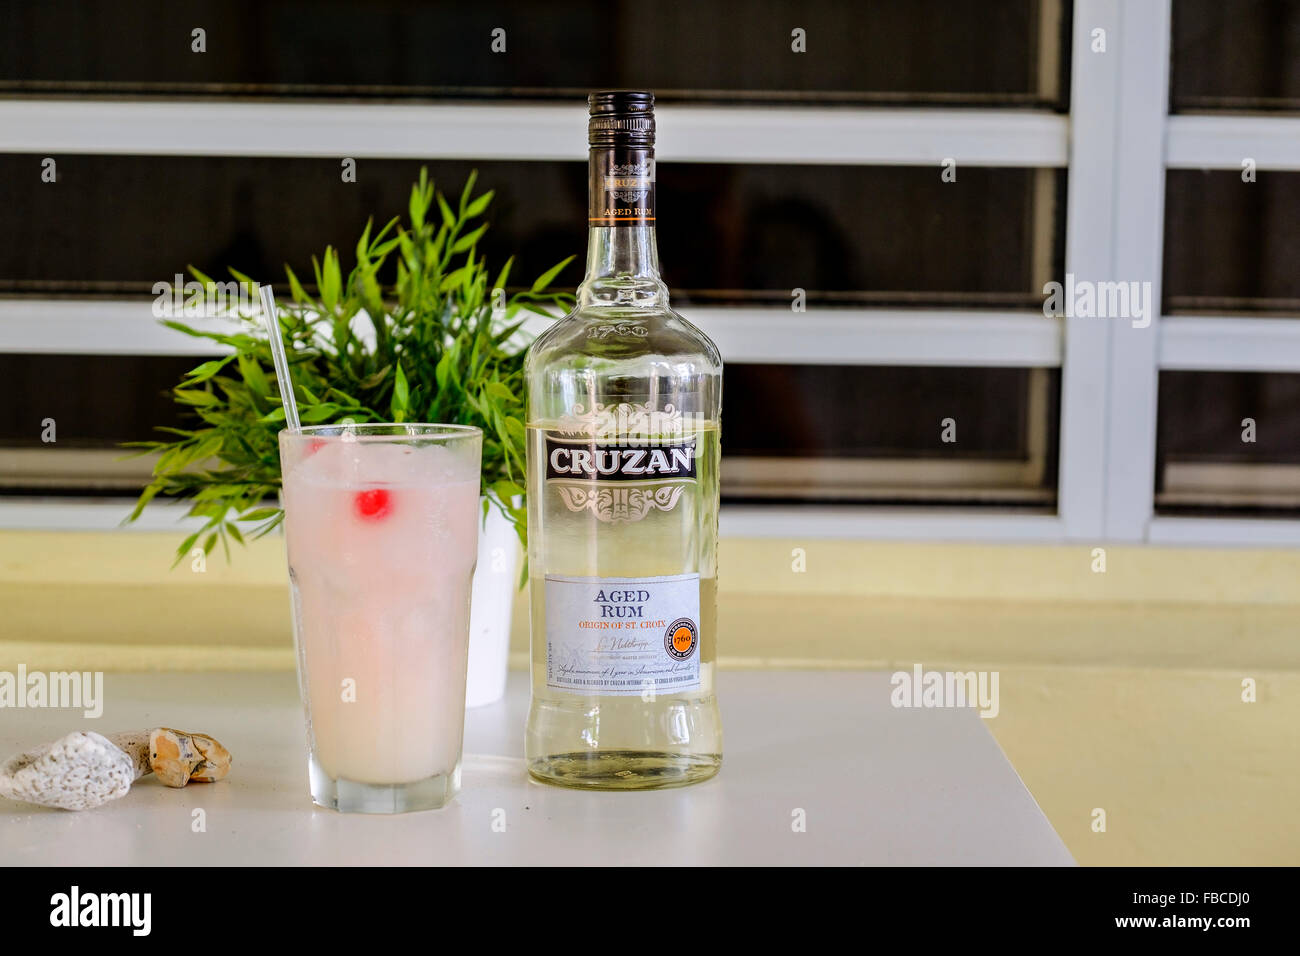 A bottle of Cruzan aged rum which is distilled on the island of St. Croix, VI, and a rum cocktail in a glass. Stock Photo